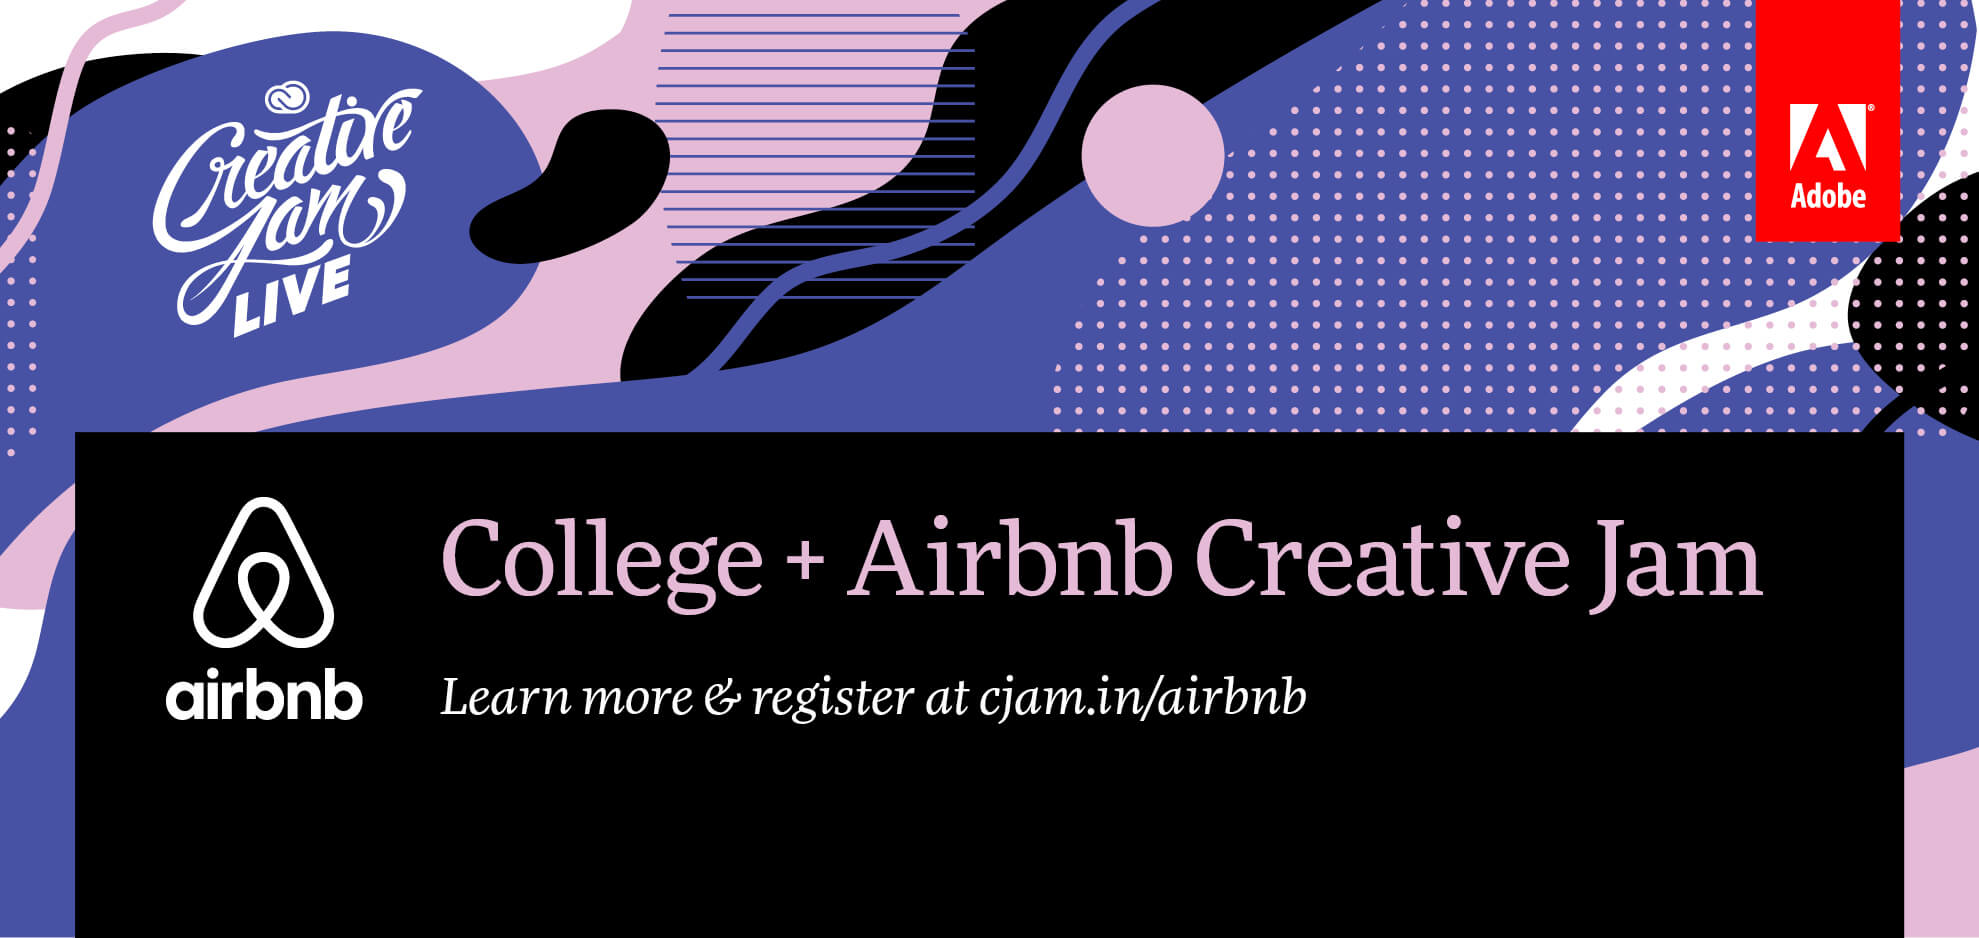 Adobe and Airbnb Creative Jam banner